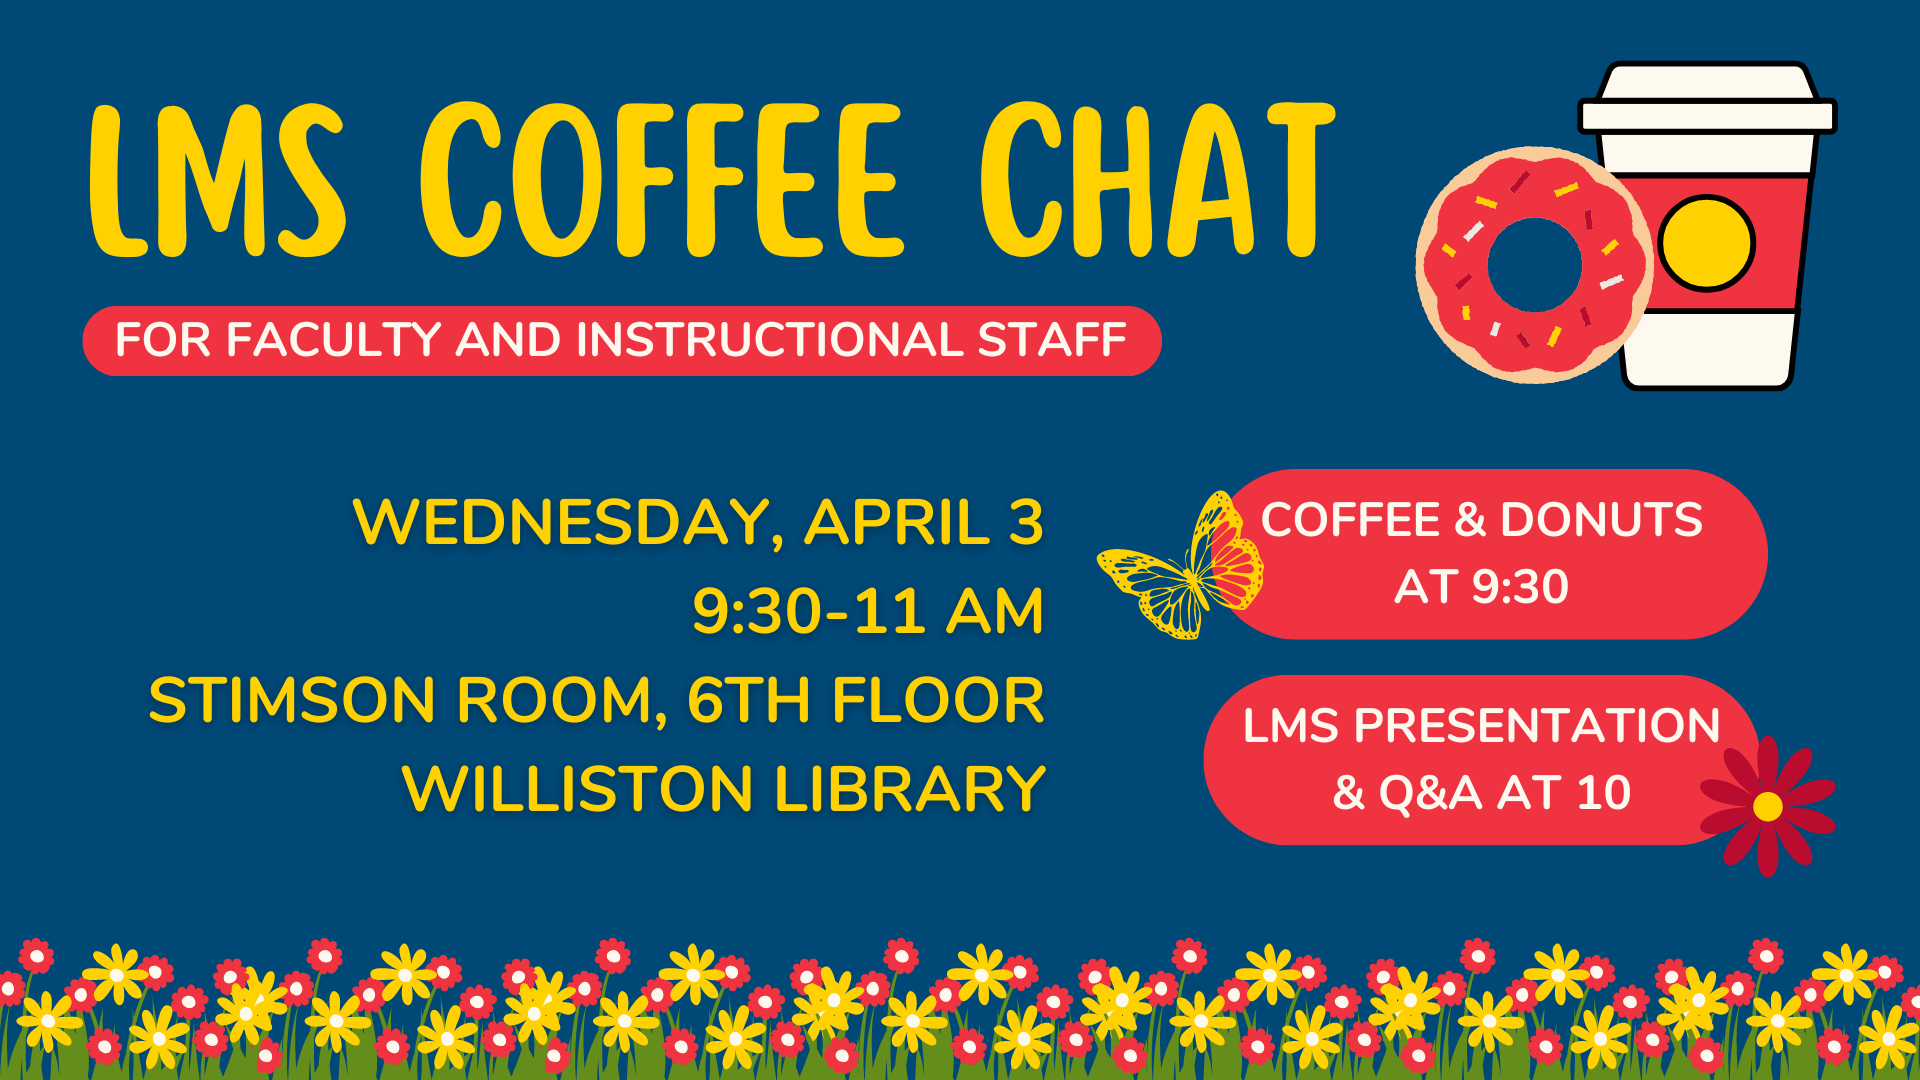 LMS Coffee Chat Event Info